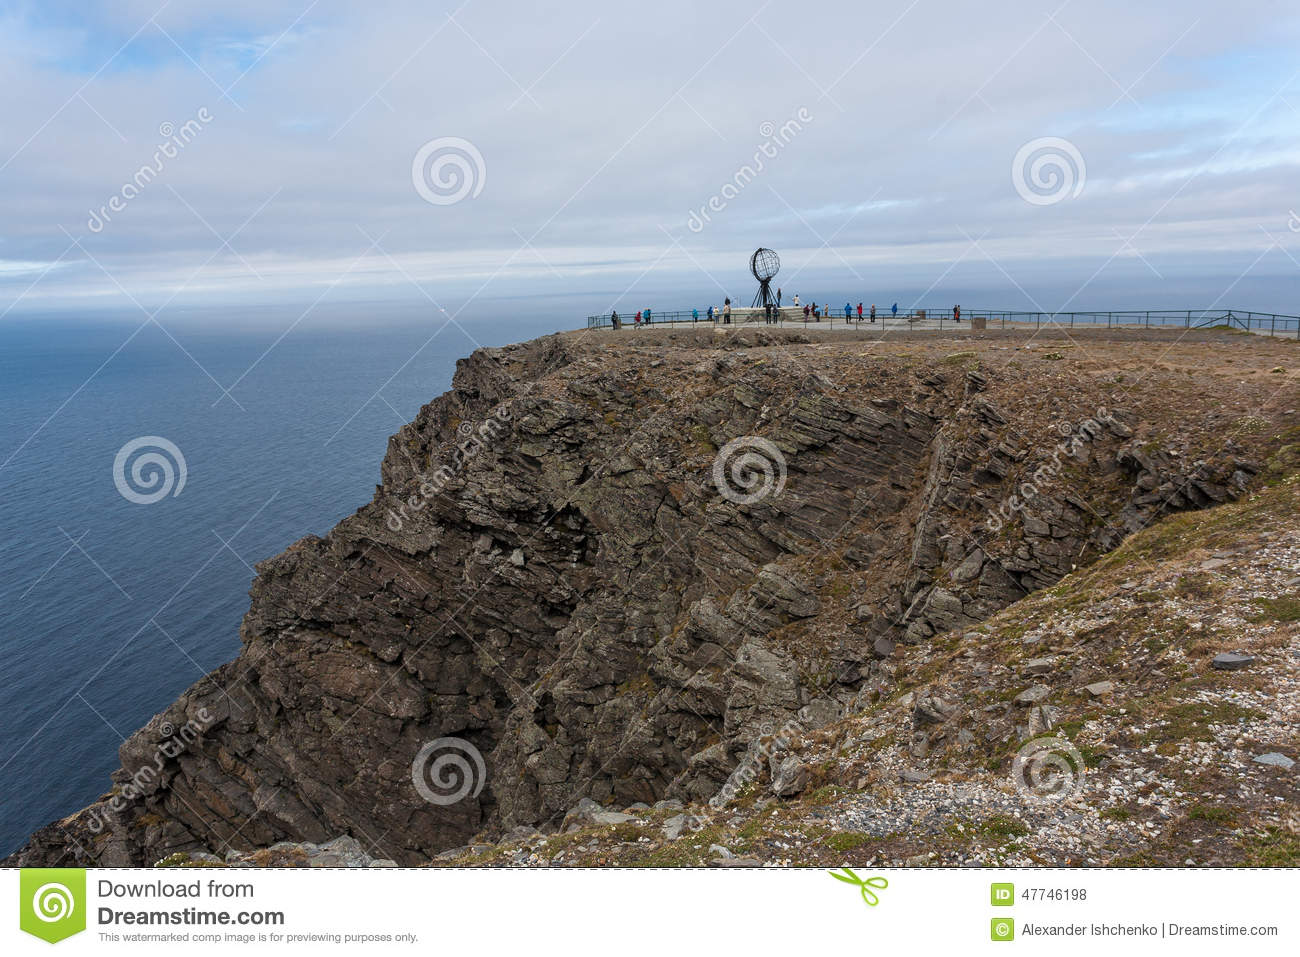 Globe Monument At Nordkapp The Northern Point Of Europe Located In